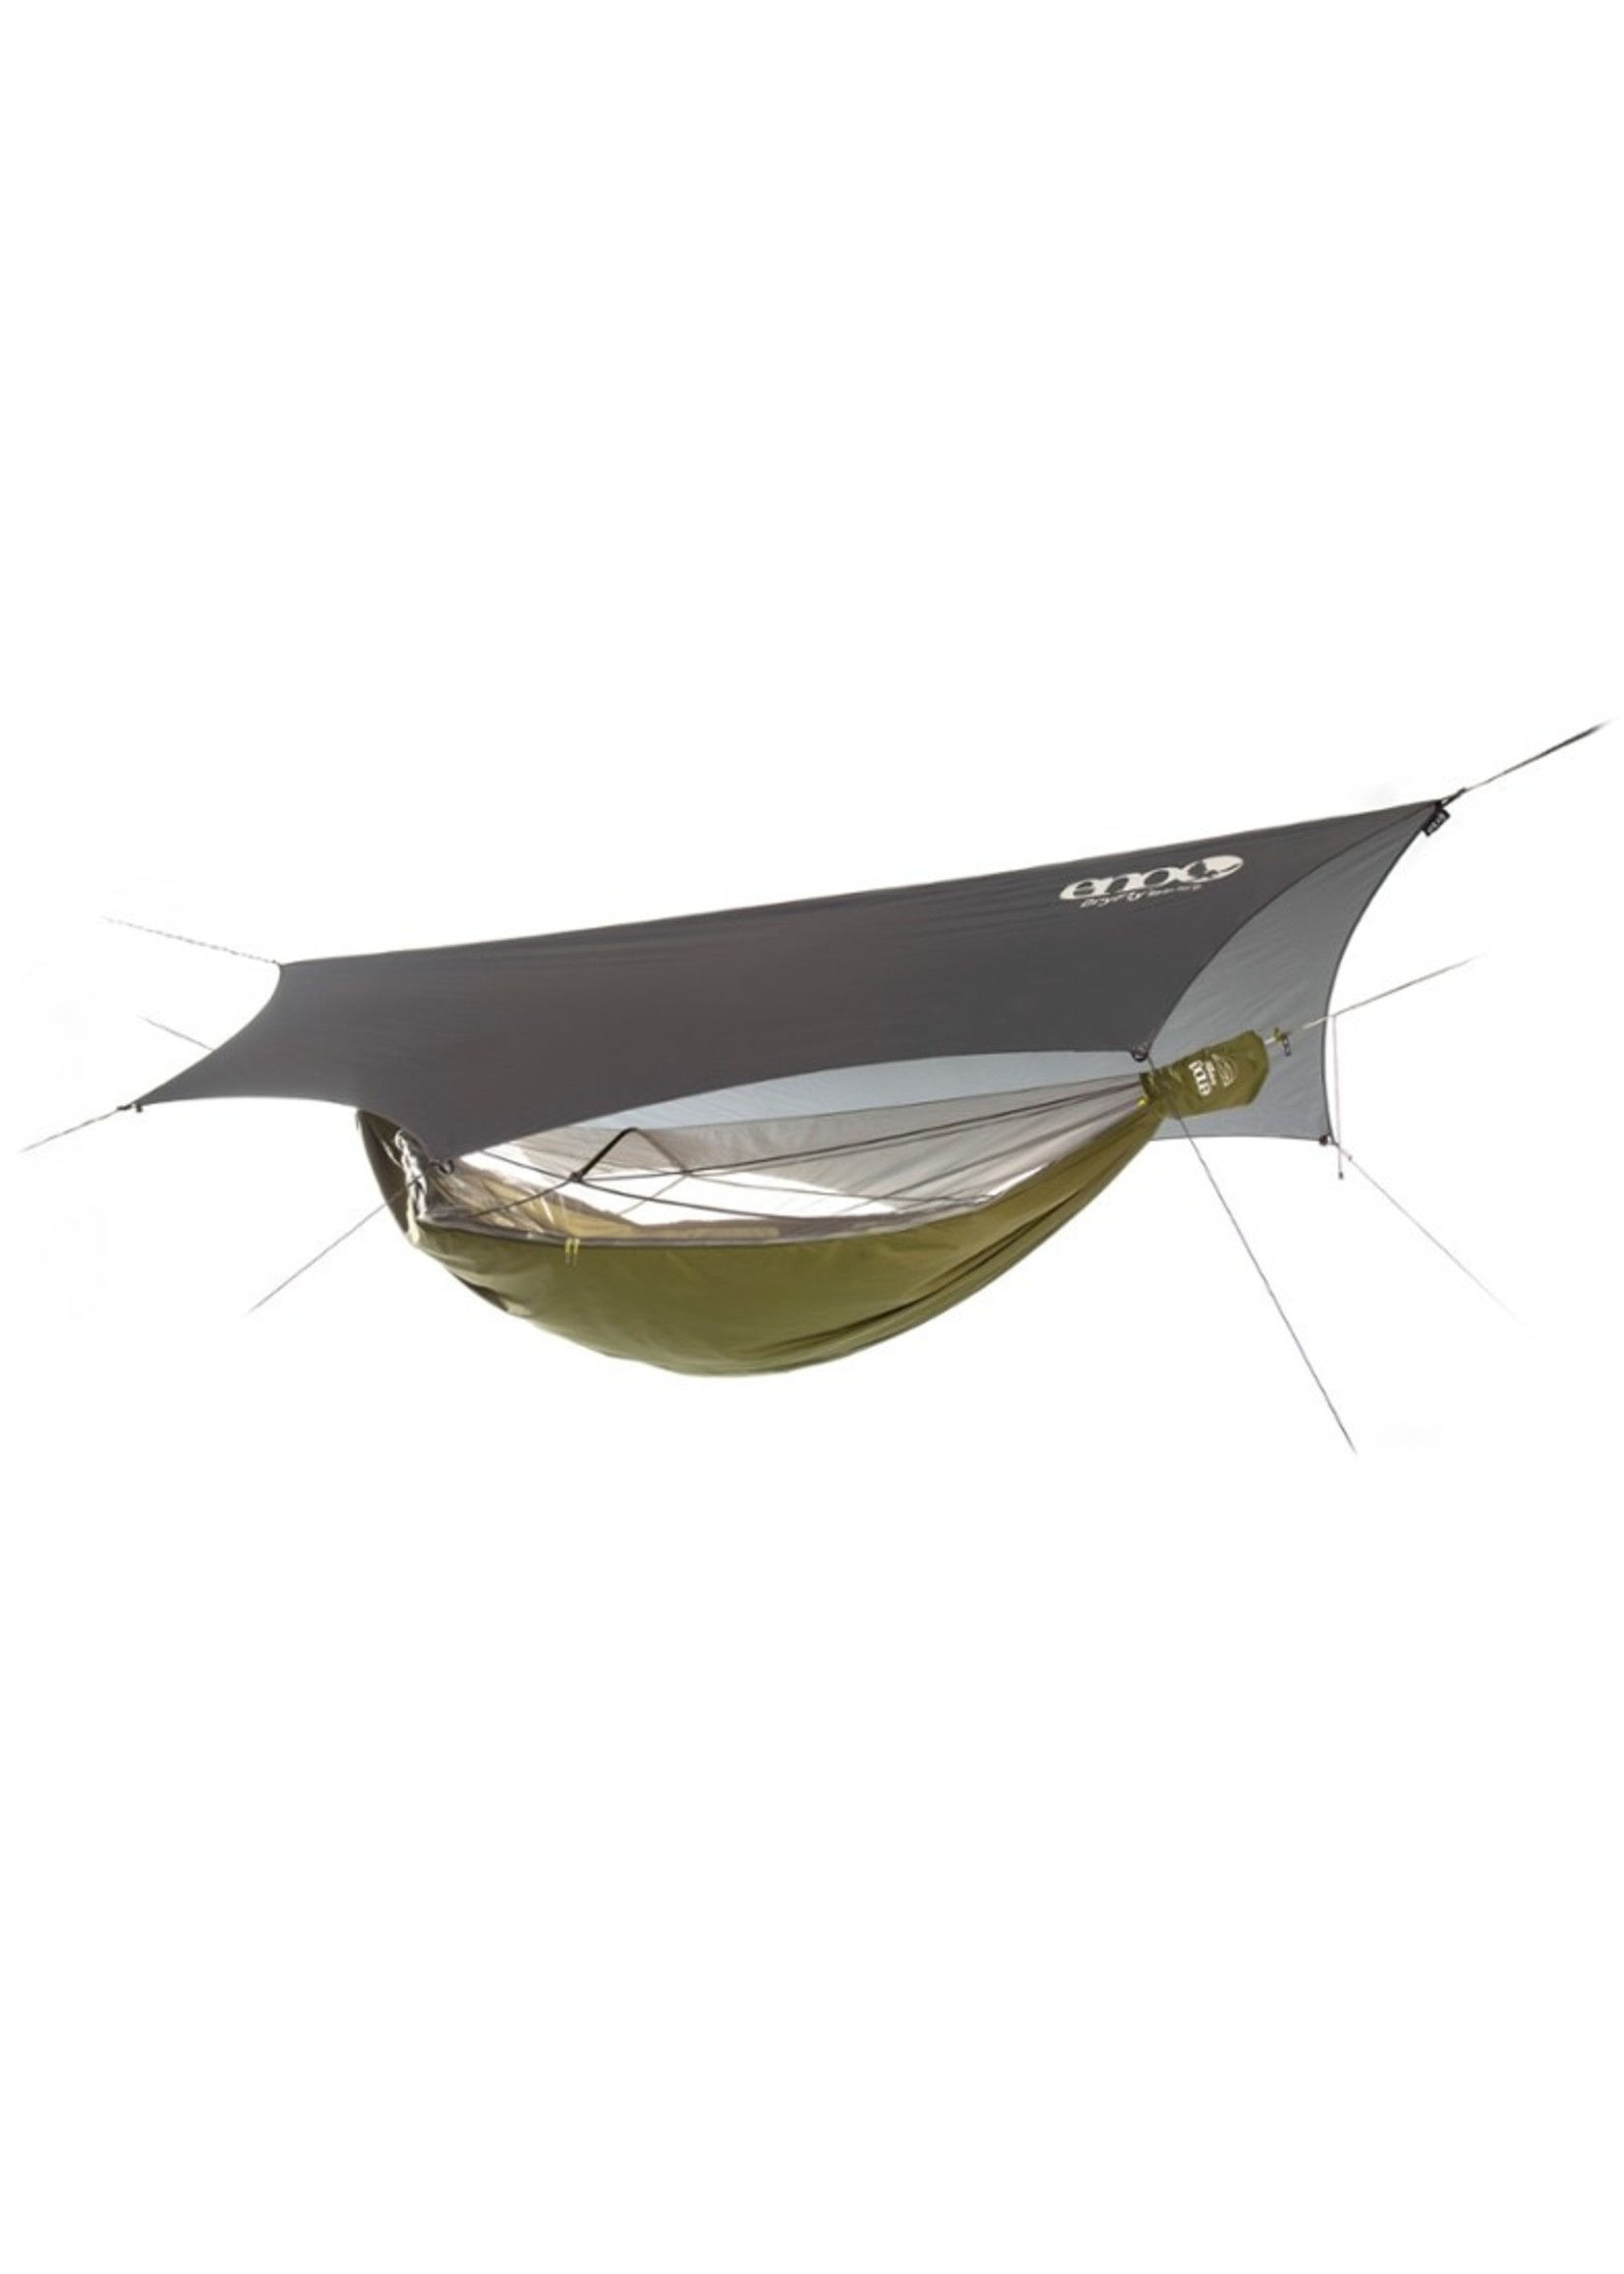 ENO- Eagles Nest Outfitters JungleLink Hammock System Charcoal | Evergreen